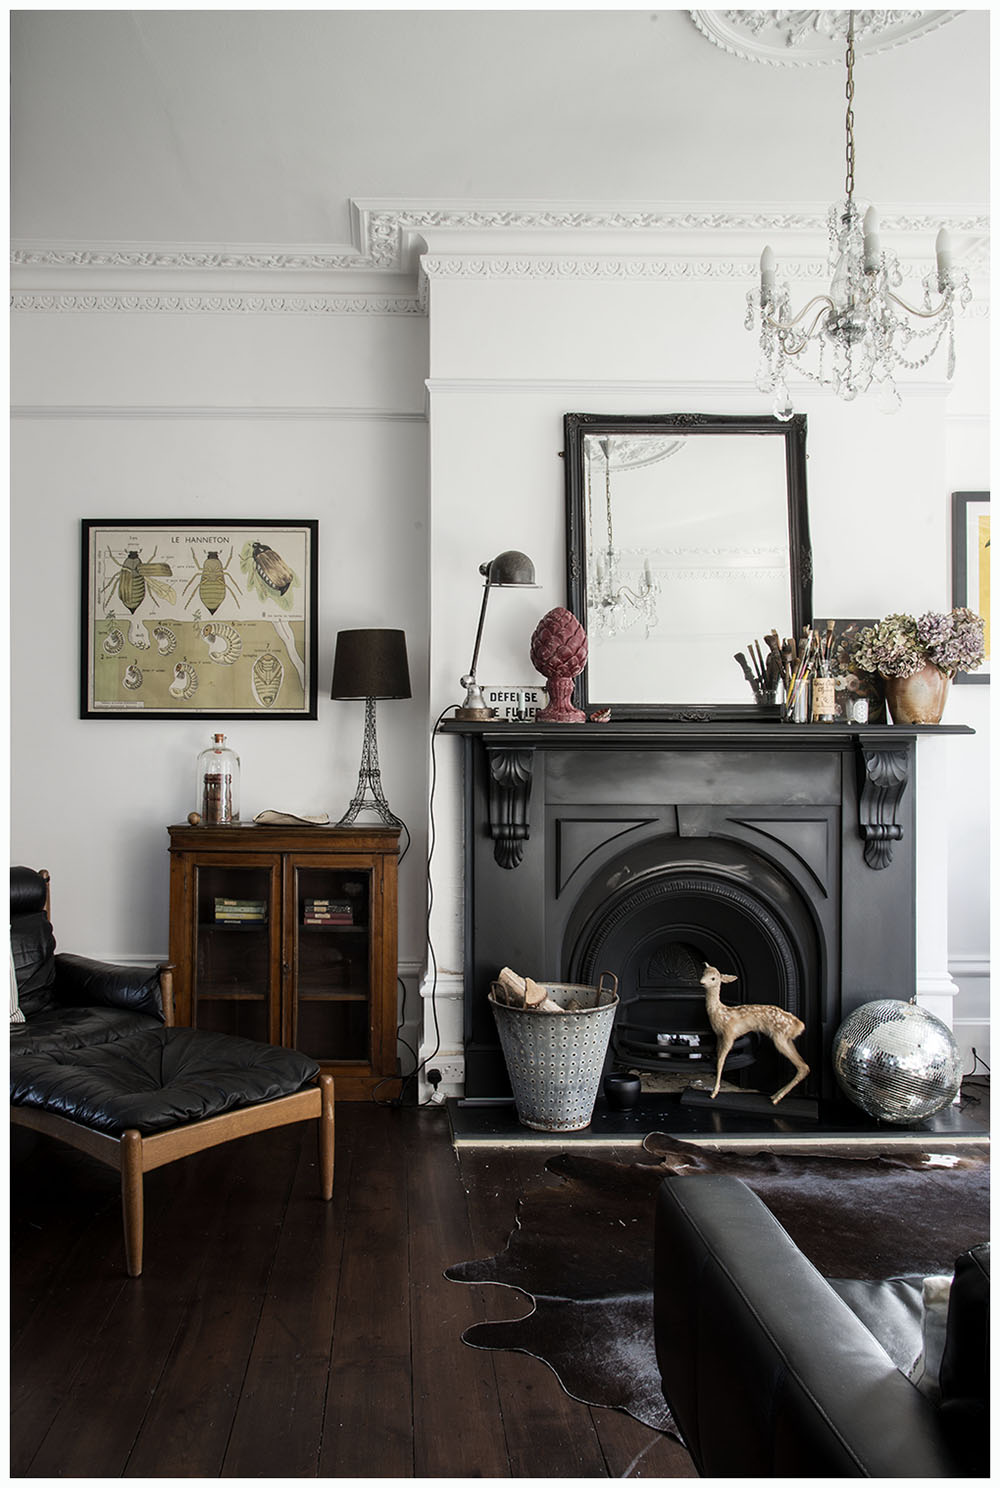 Home and Art:  Interior Chic